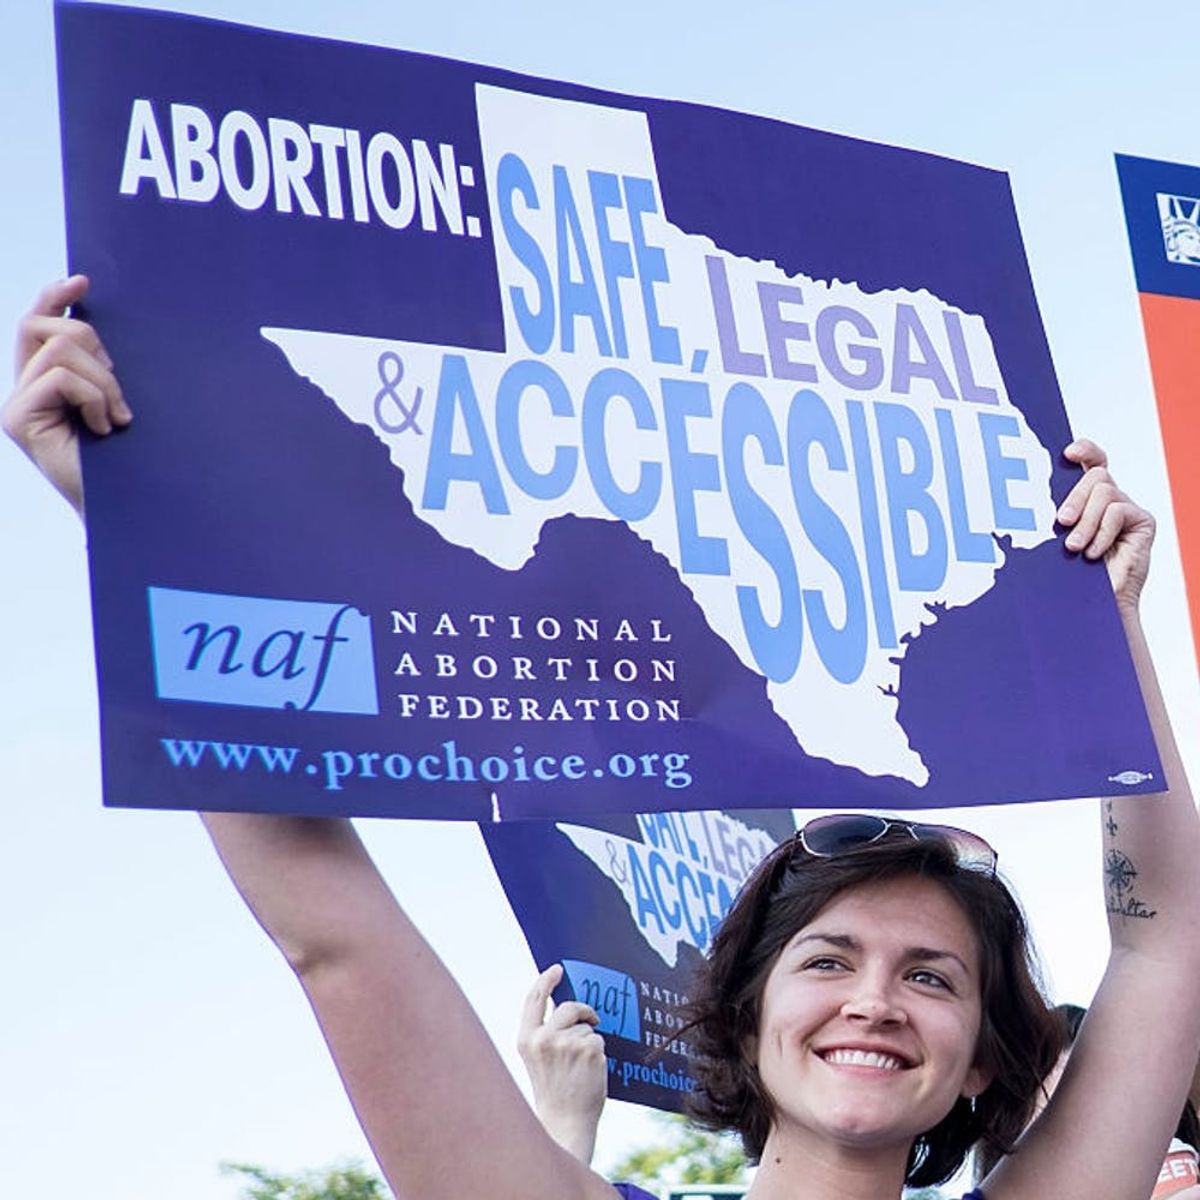 Texas Faces an Ugly Legal Battle After Banning One of the Safest Abortion Procedures Available